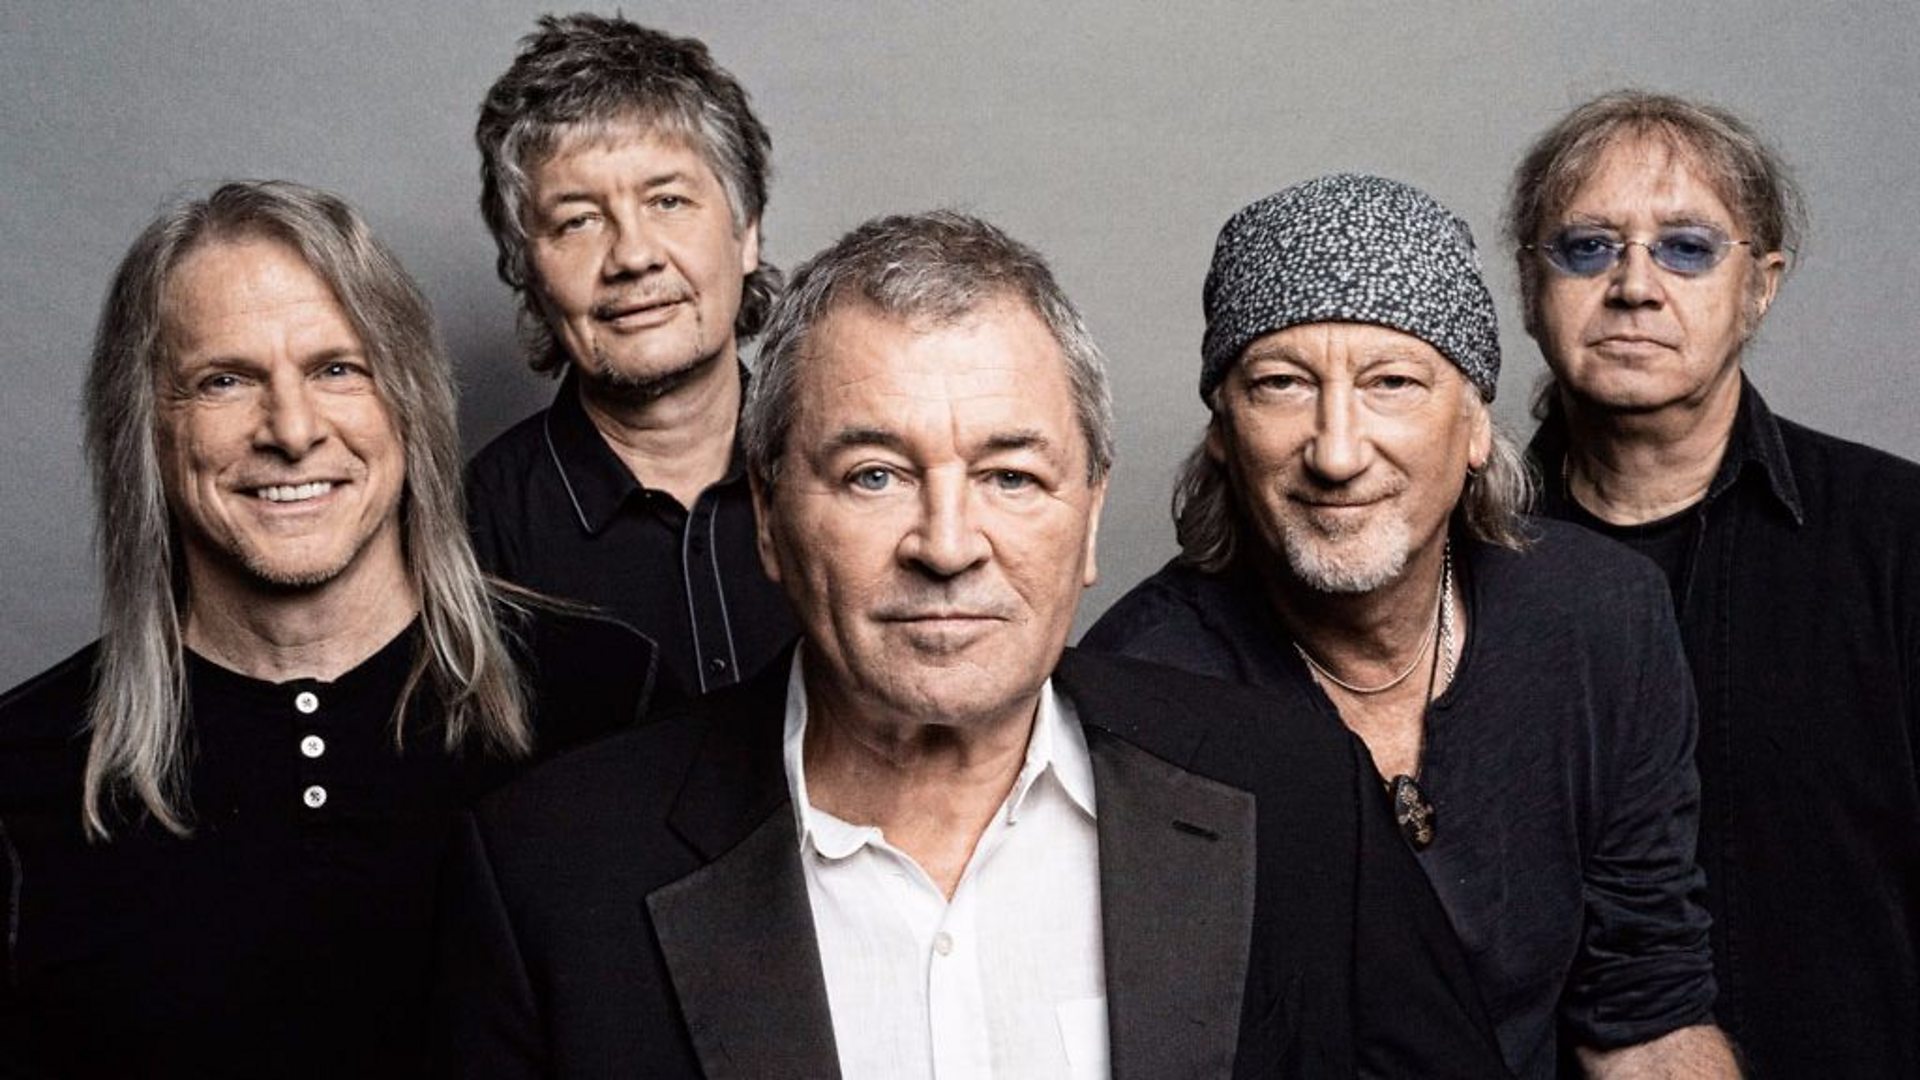 BBC - Six solid reasons Deep Purple are the ultimate rock band